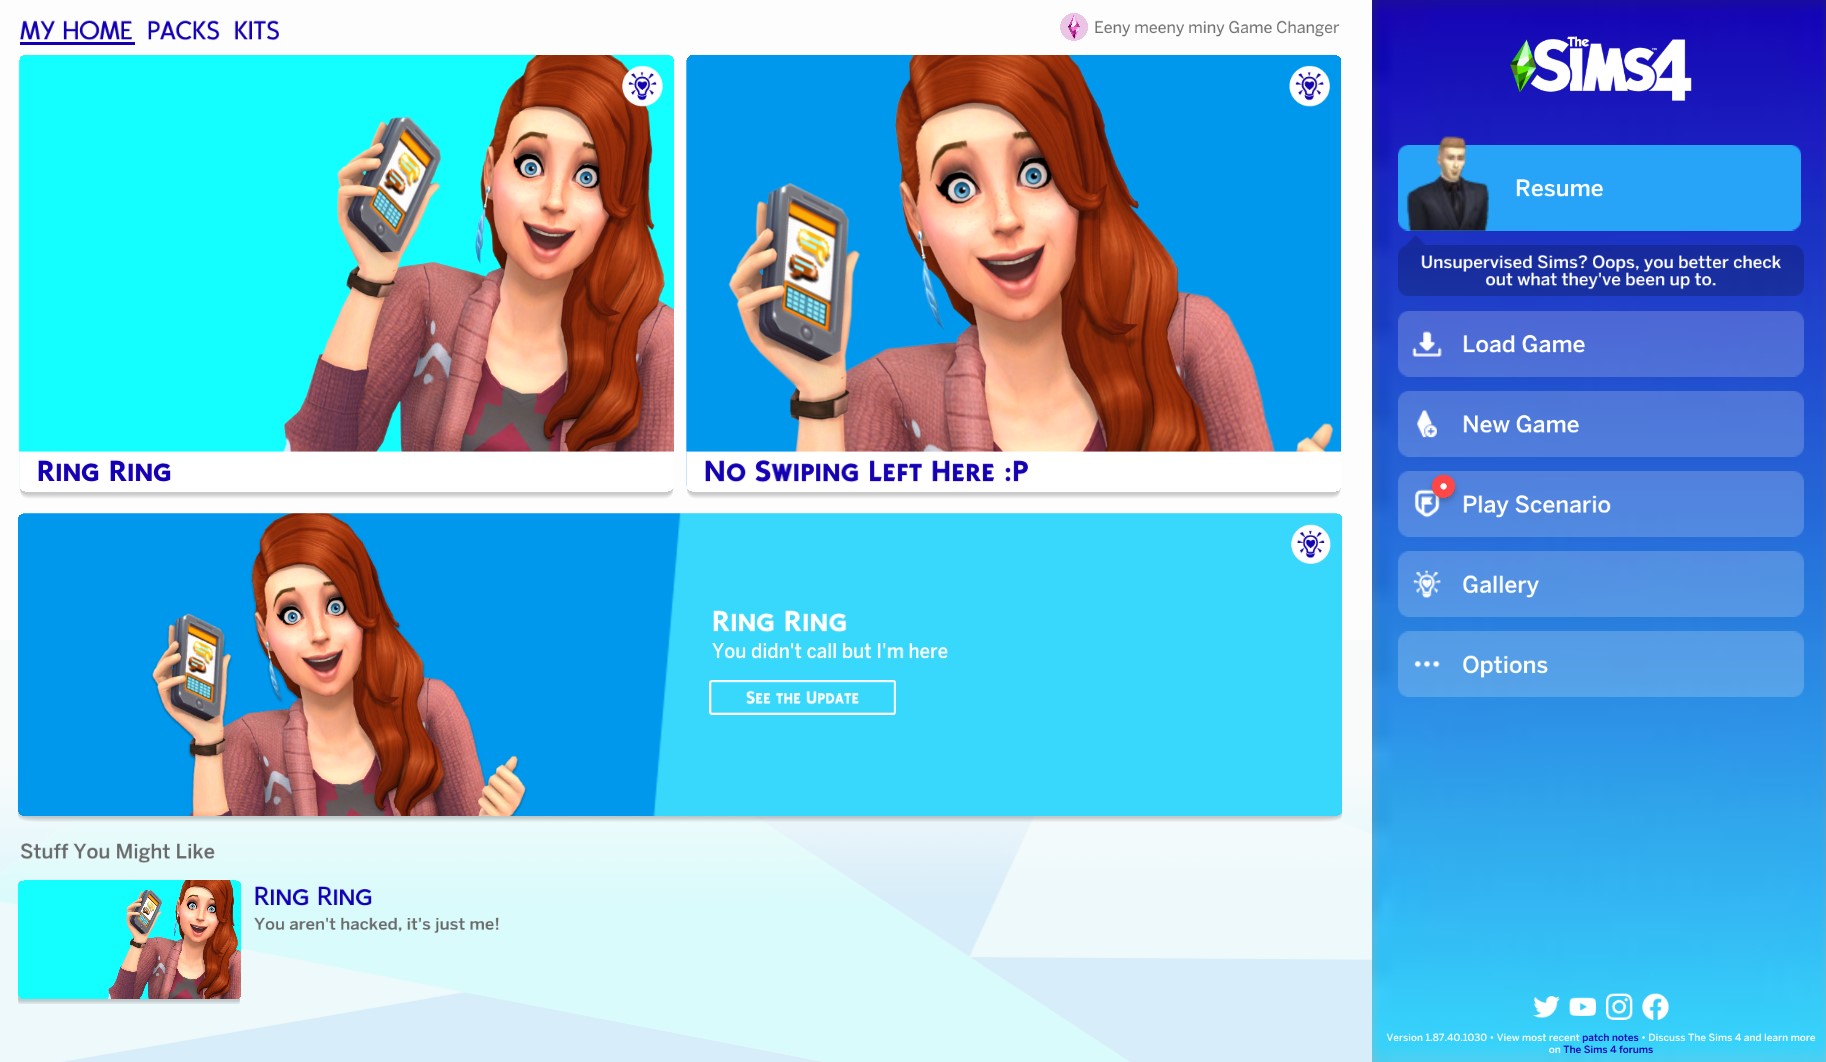 The Sims 4 1.87.40.1030 Ring Ring Surprise Update - April 26, 2022 - Game Changer Welcome Screen - Sim Architect is glad you're here!